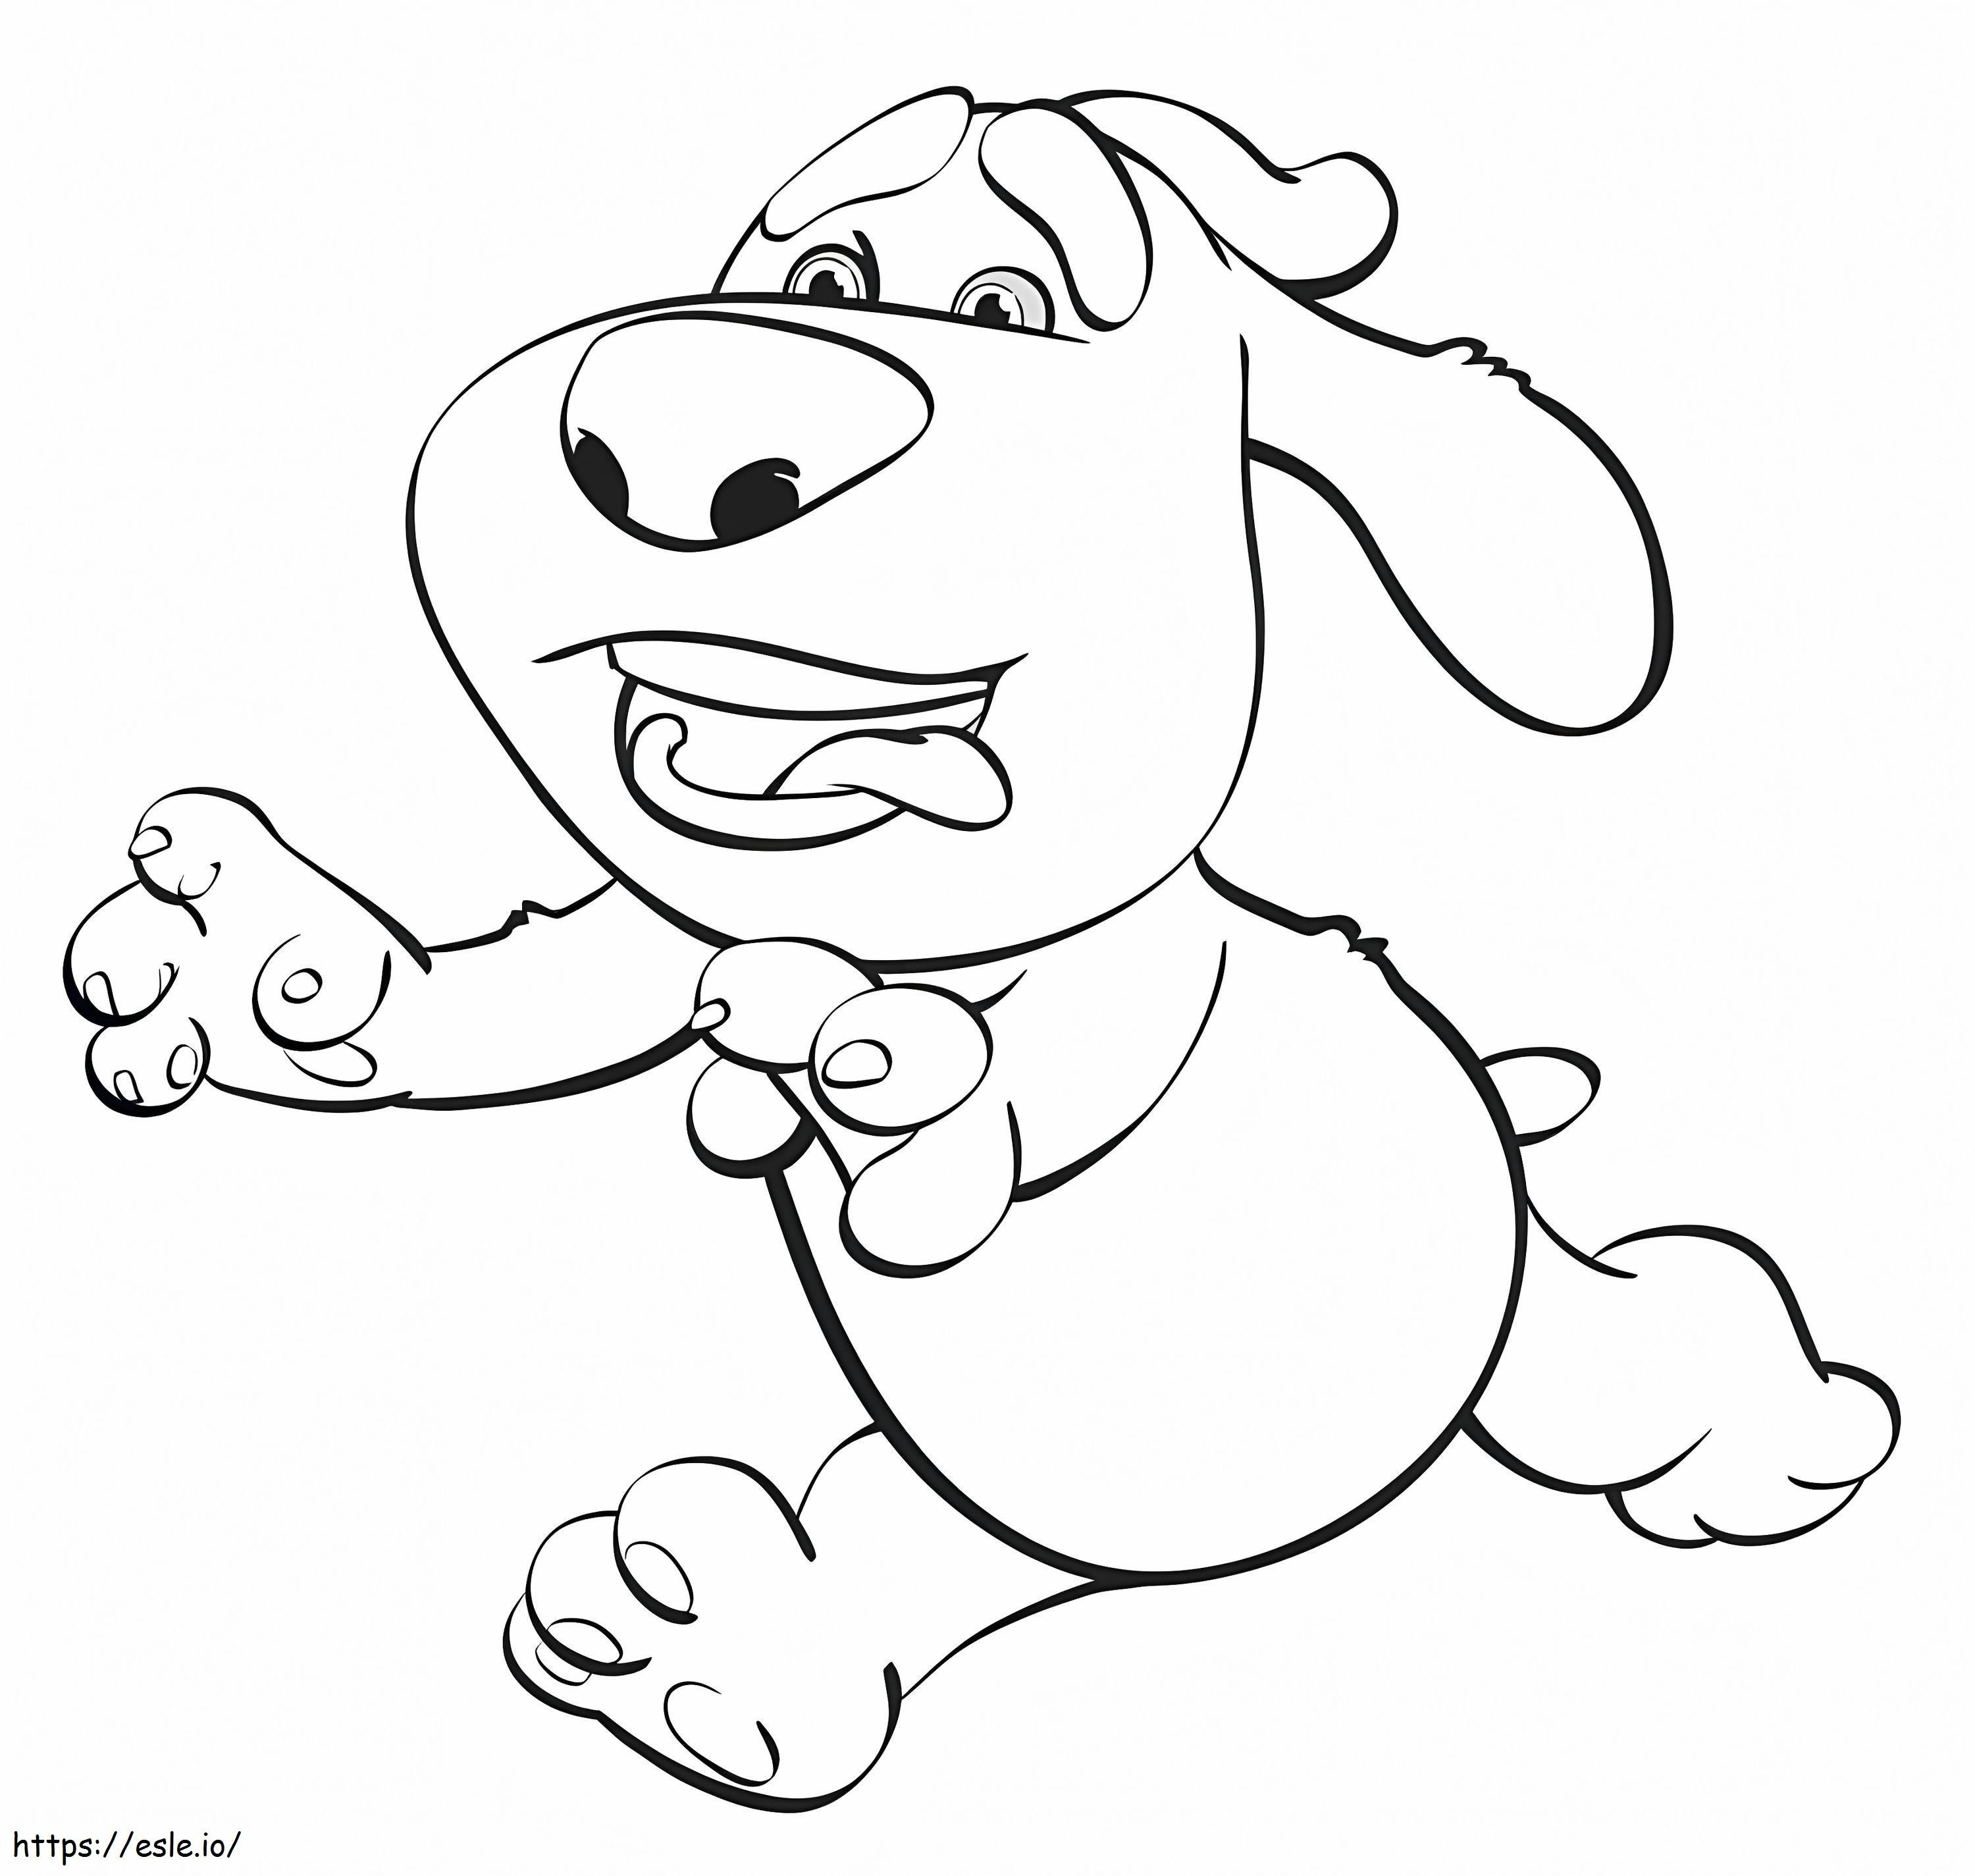 Ben From Talking Tom coloring page